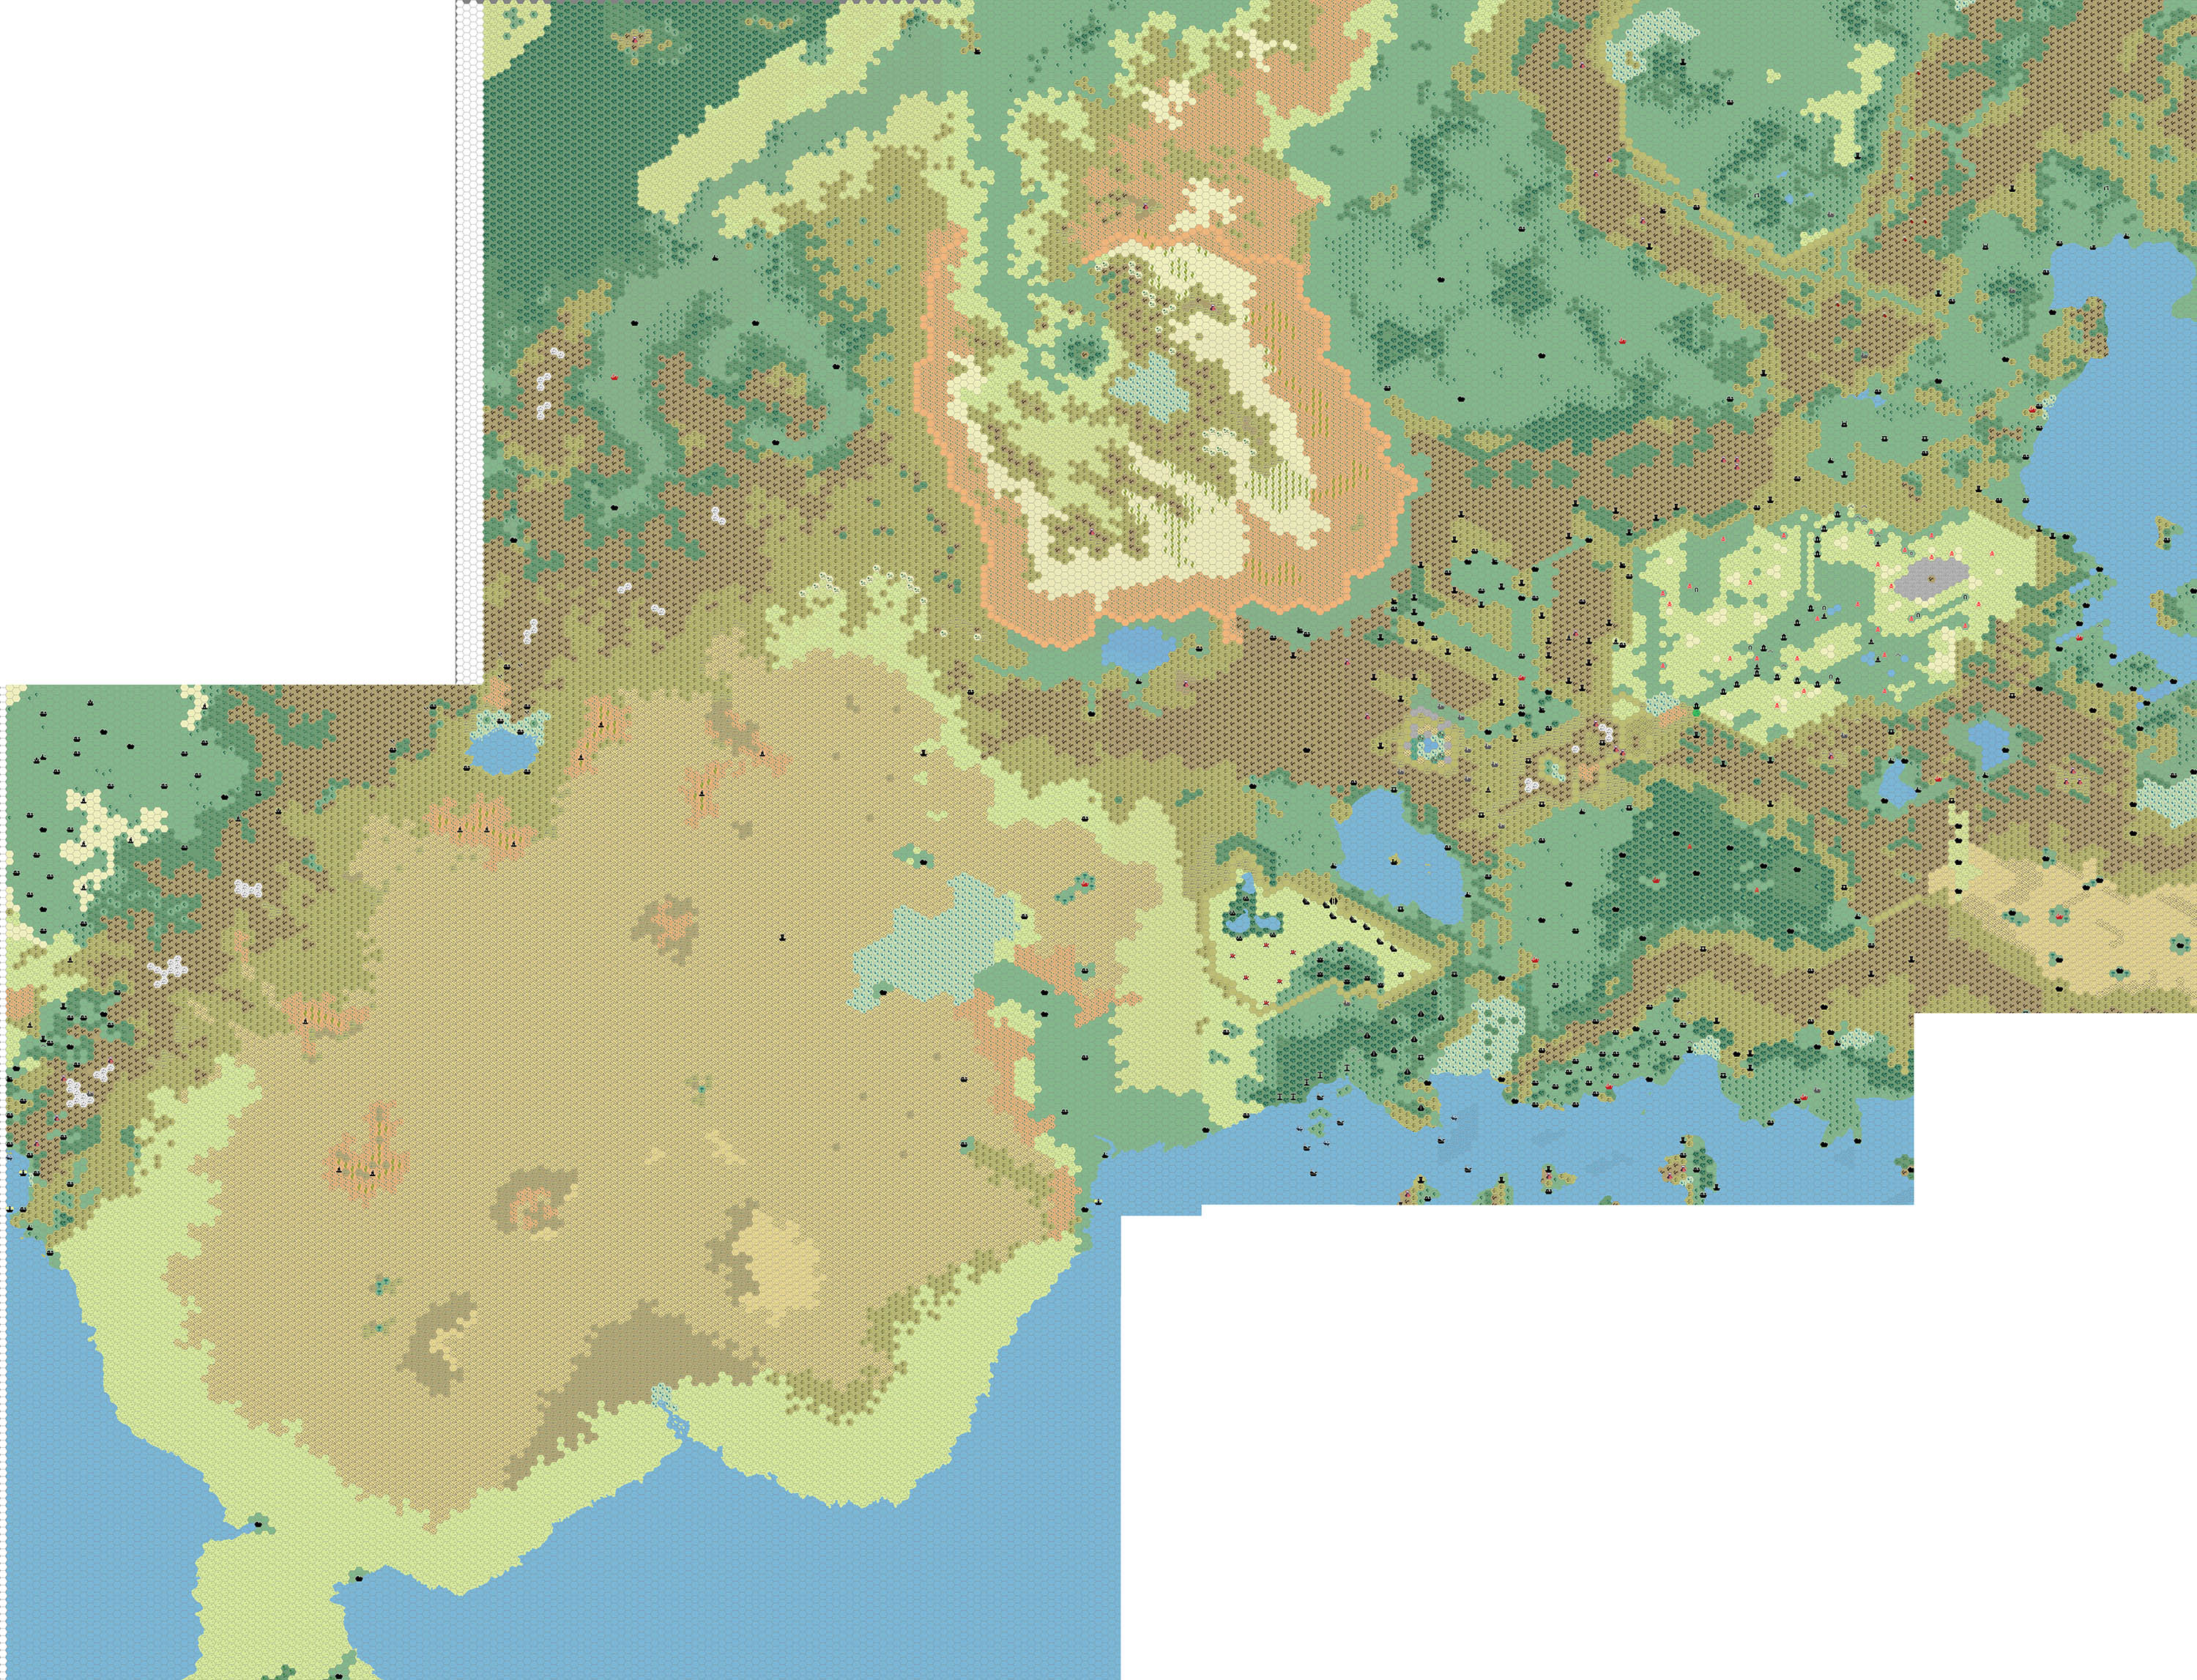 Work-in-progress map of the Known World, the Great Waste, and surrounding lands, 8 miles per hex by Thibault Sarlat, July 2005